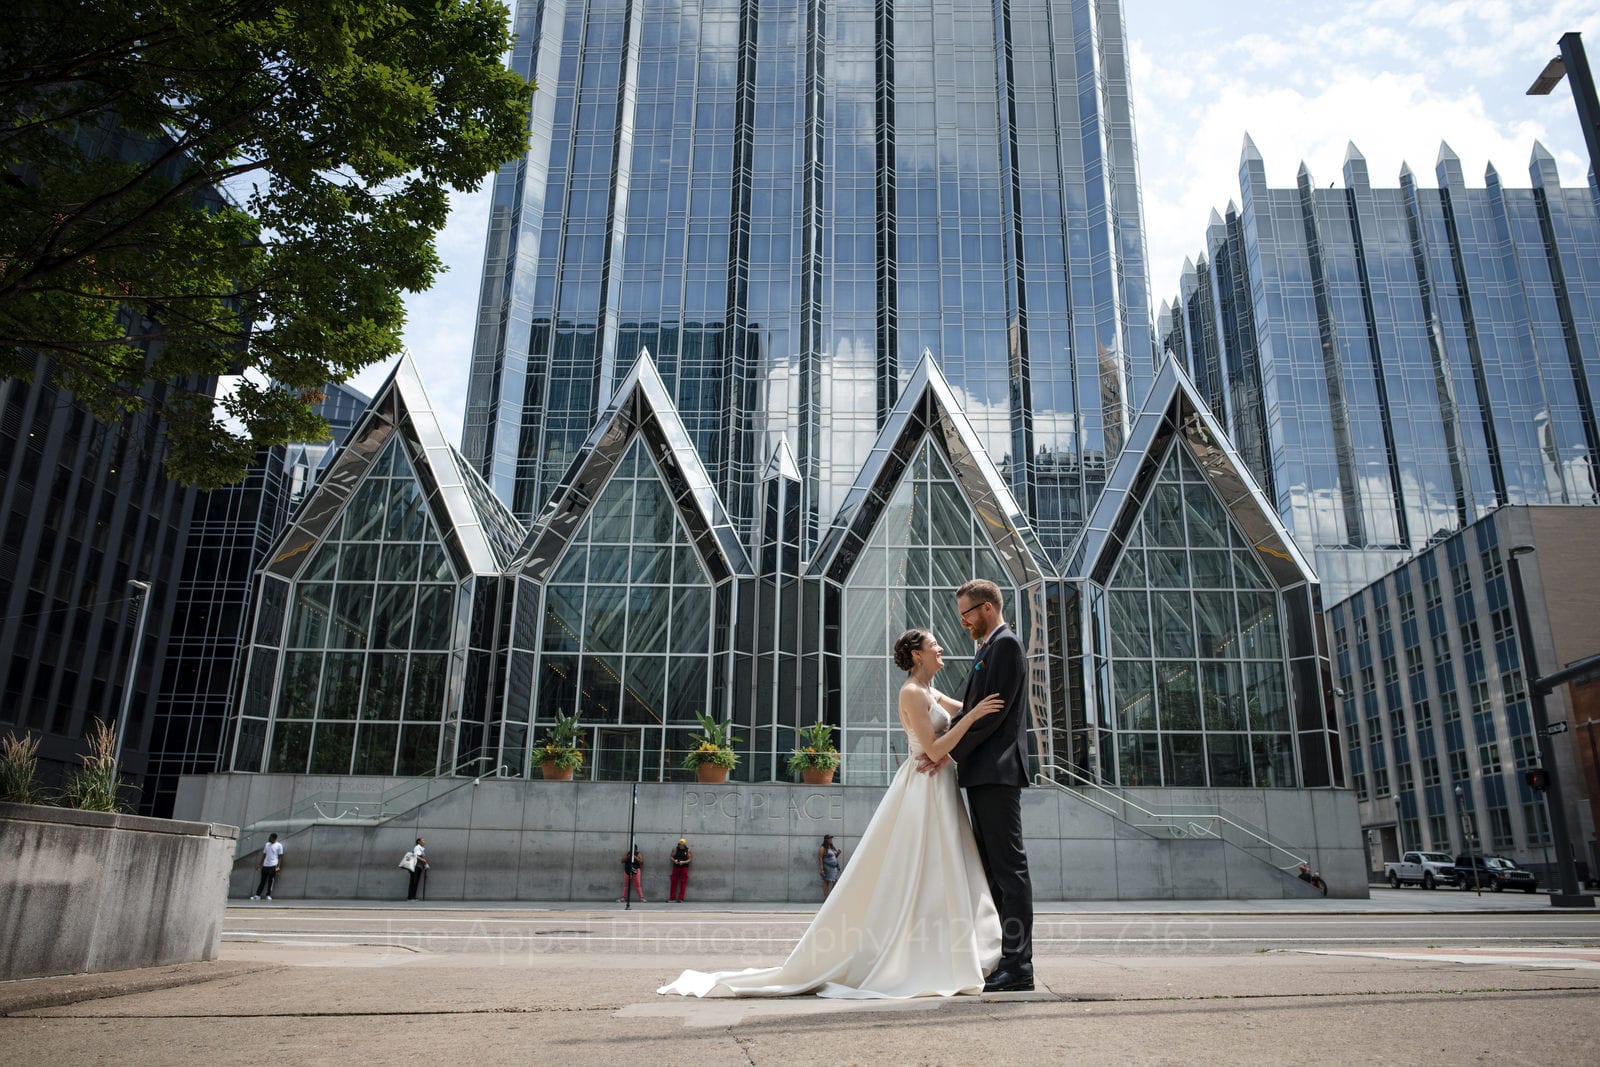 A bride and groom embrace on the street in front of PPG Place in downtown Pittsburgh. The pointed mirrored glass structure provides a dramatic backdrop.